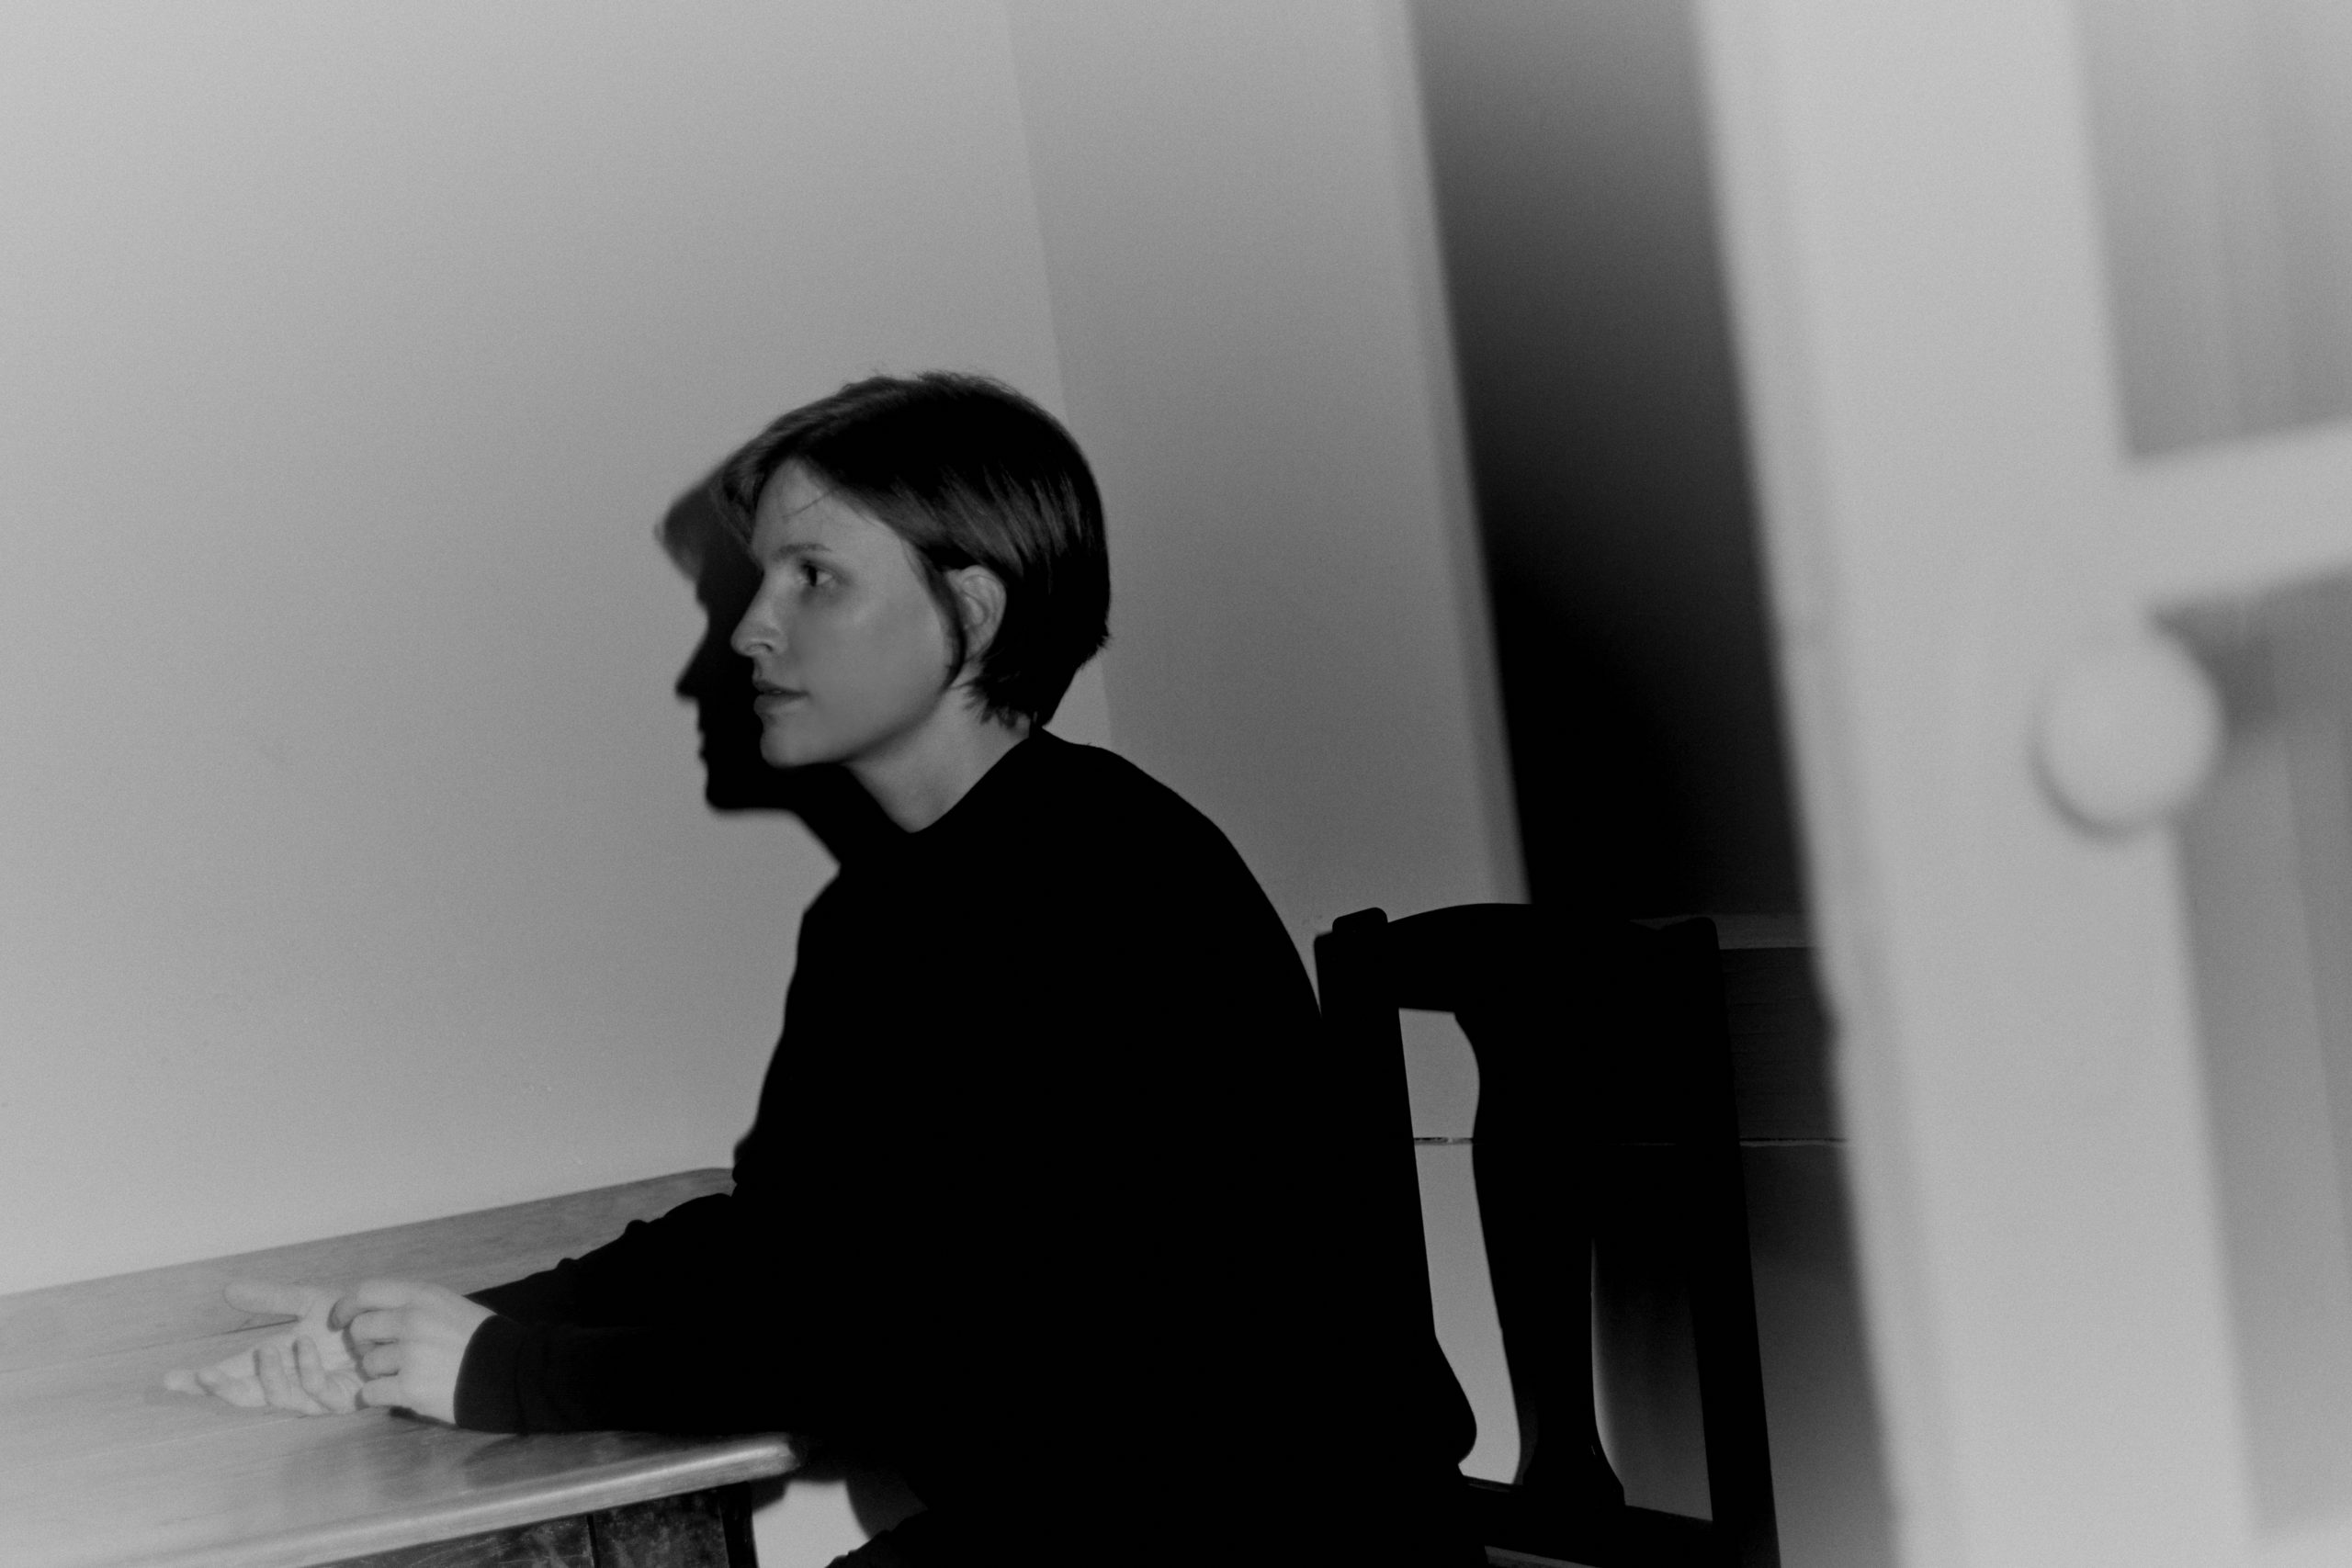 A woman sitting at a piano in profile. This is a black and white image